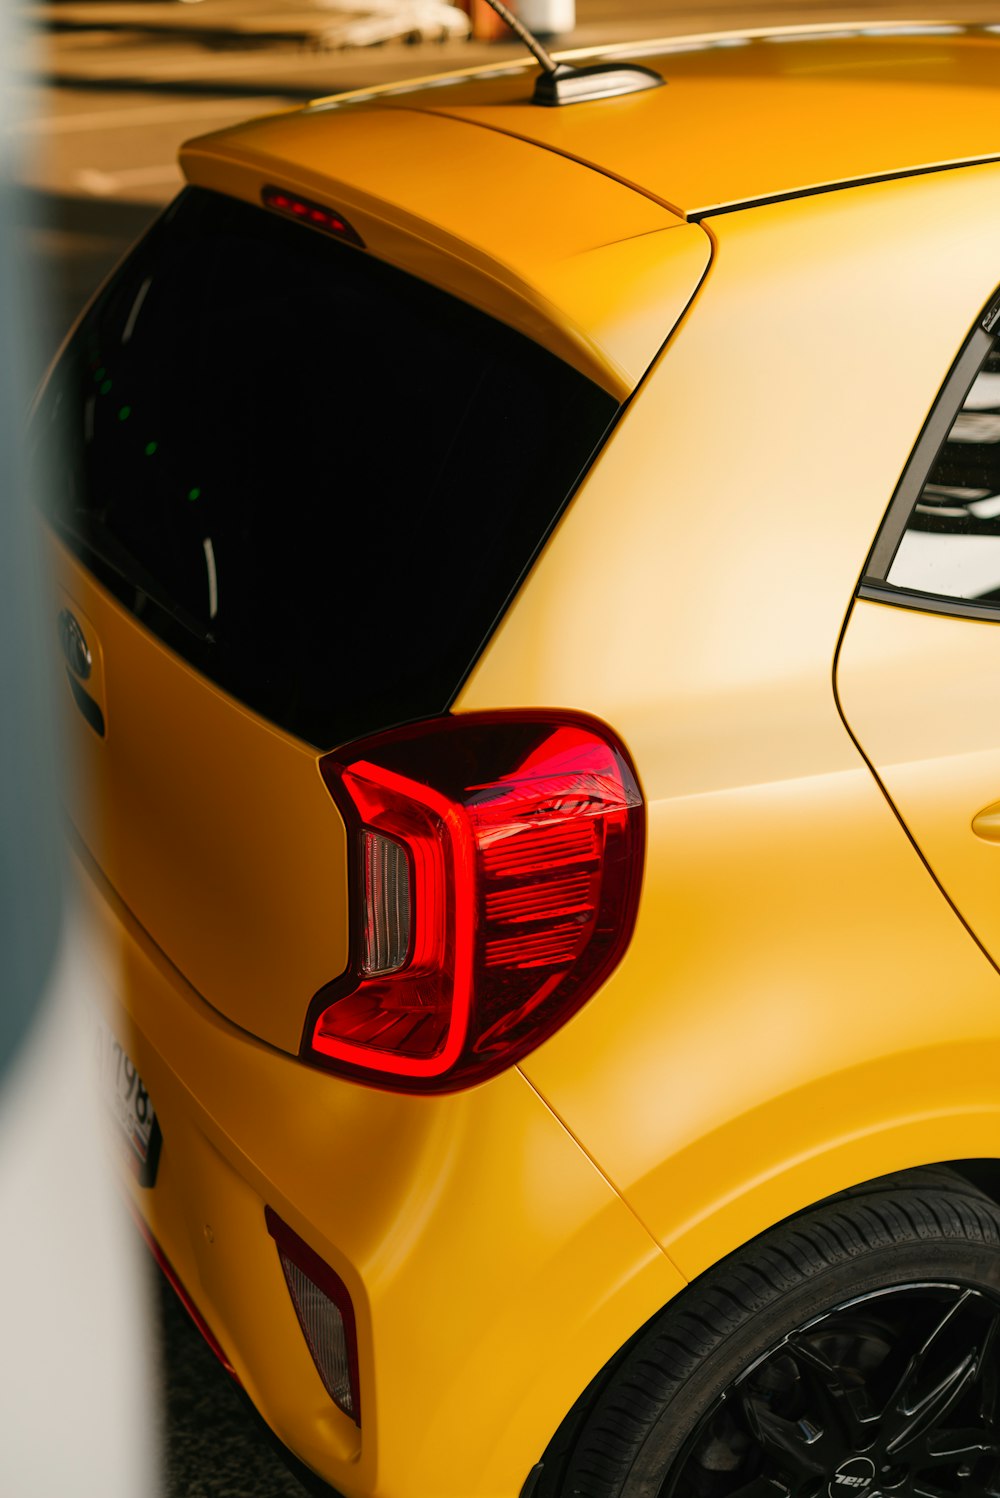 yellow and red car in close up photography